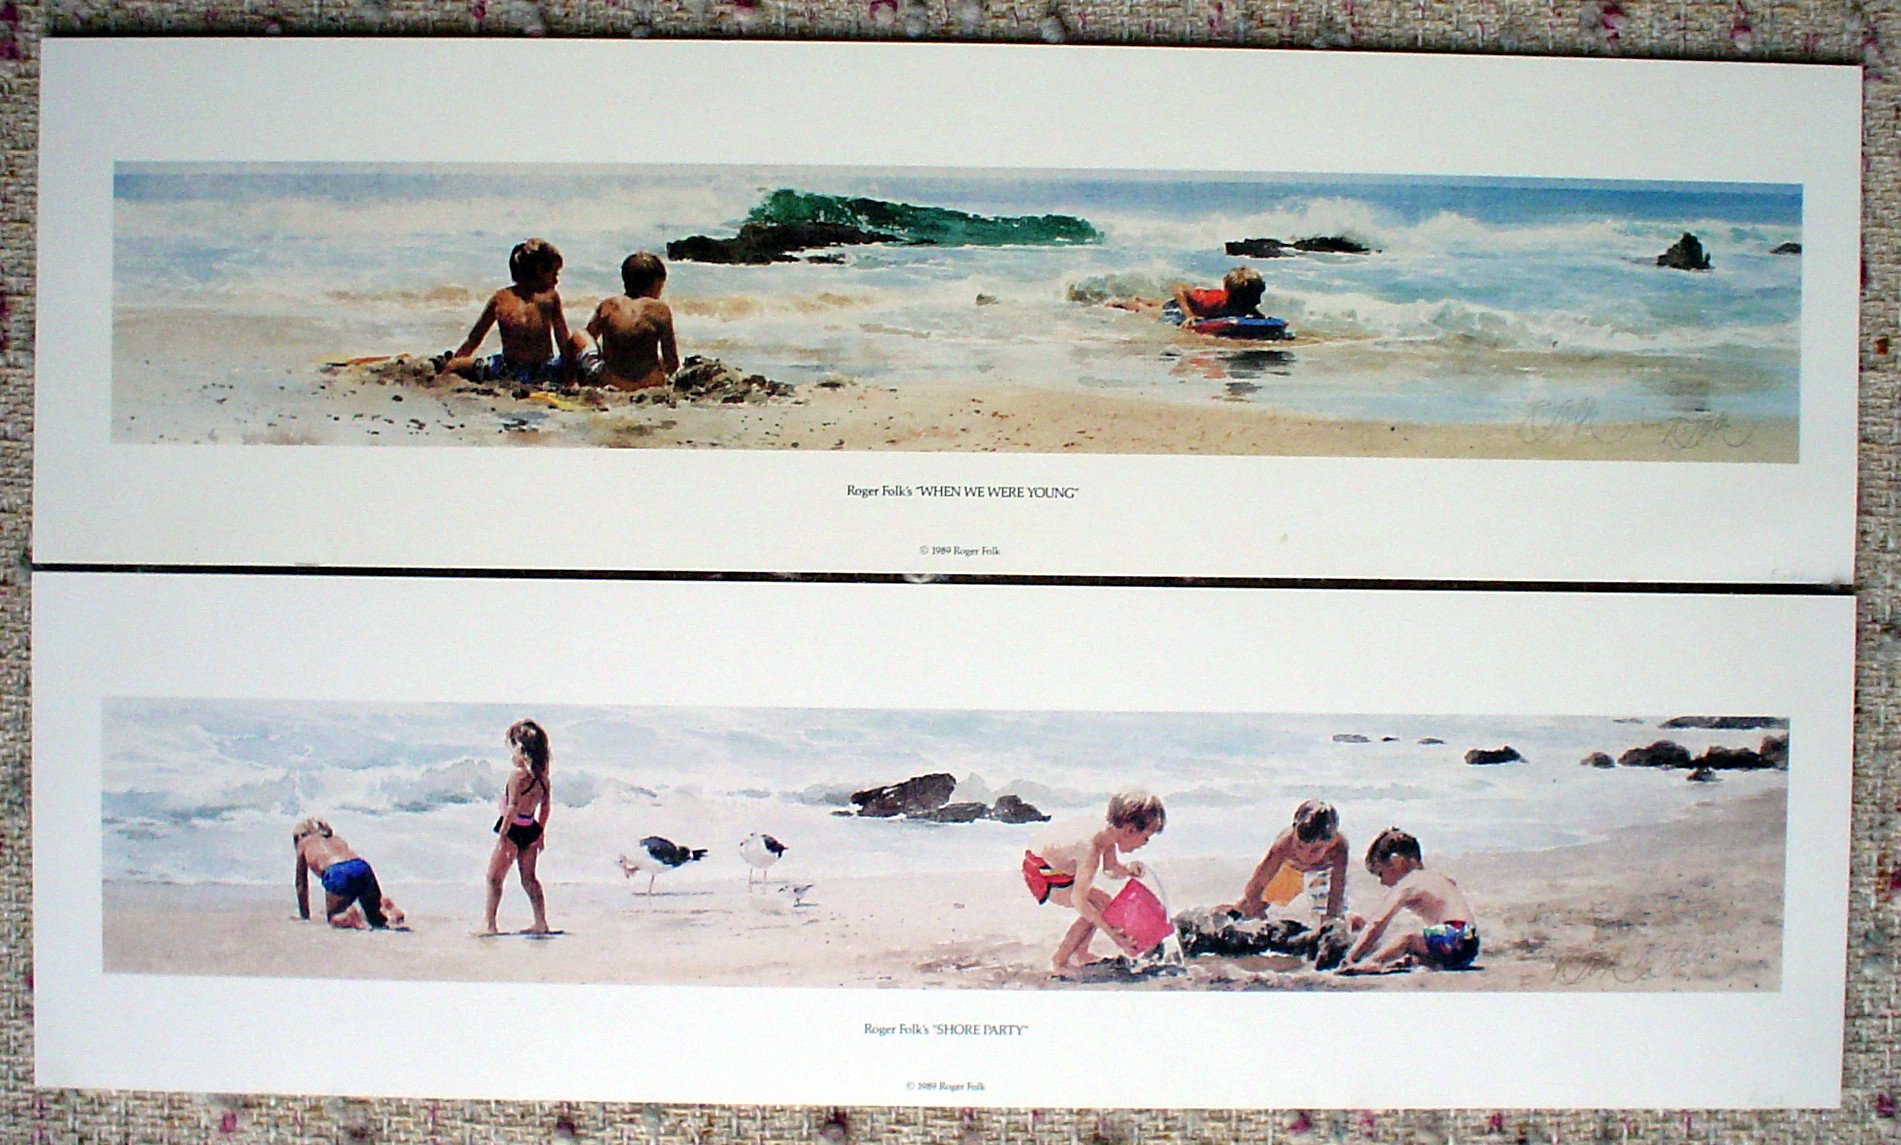 When We Were Young and Shore Party by Roger Folk, both signed by artist, shown with full margins - two offset lithograph fine art prints